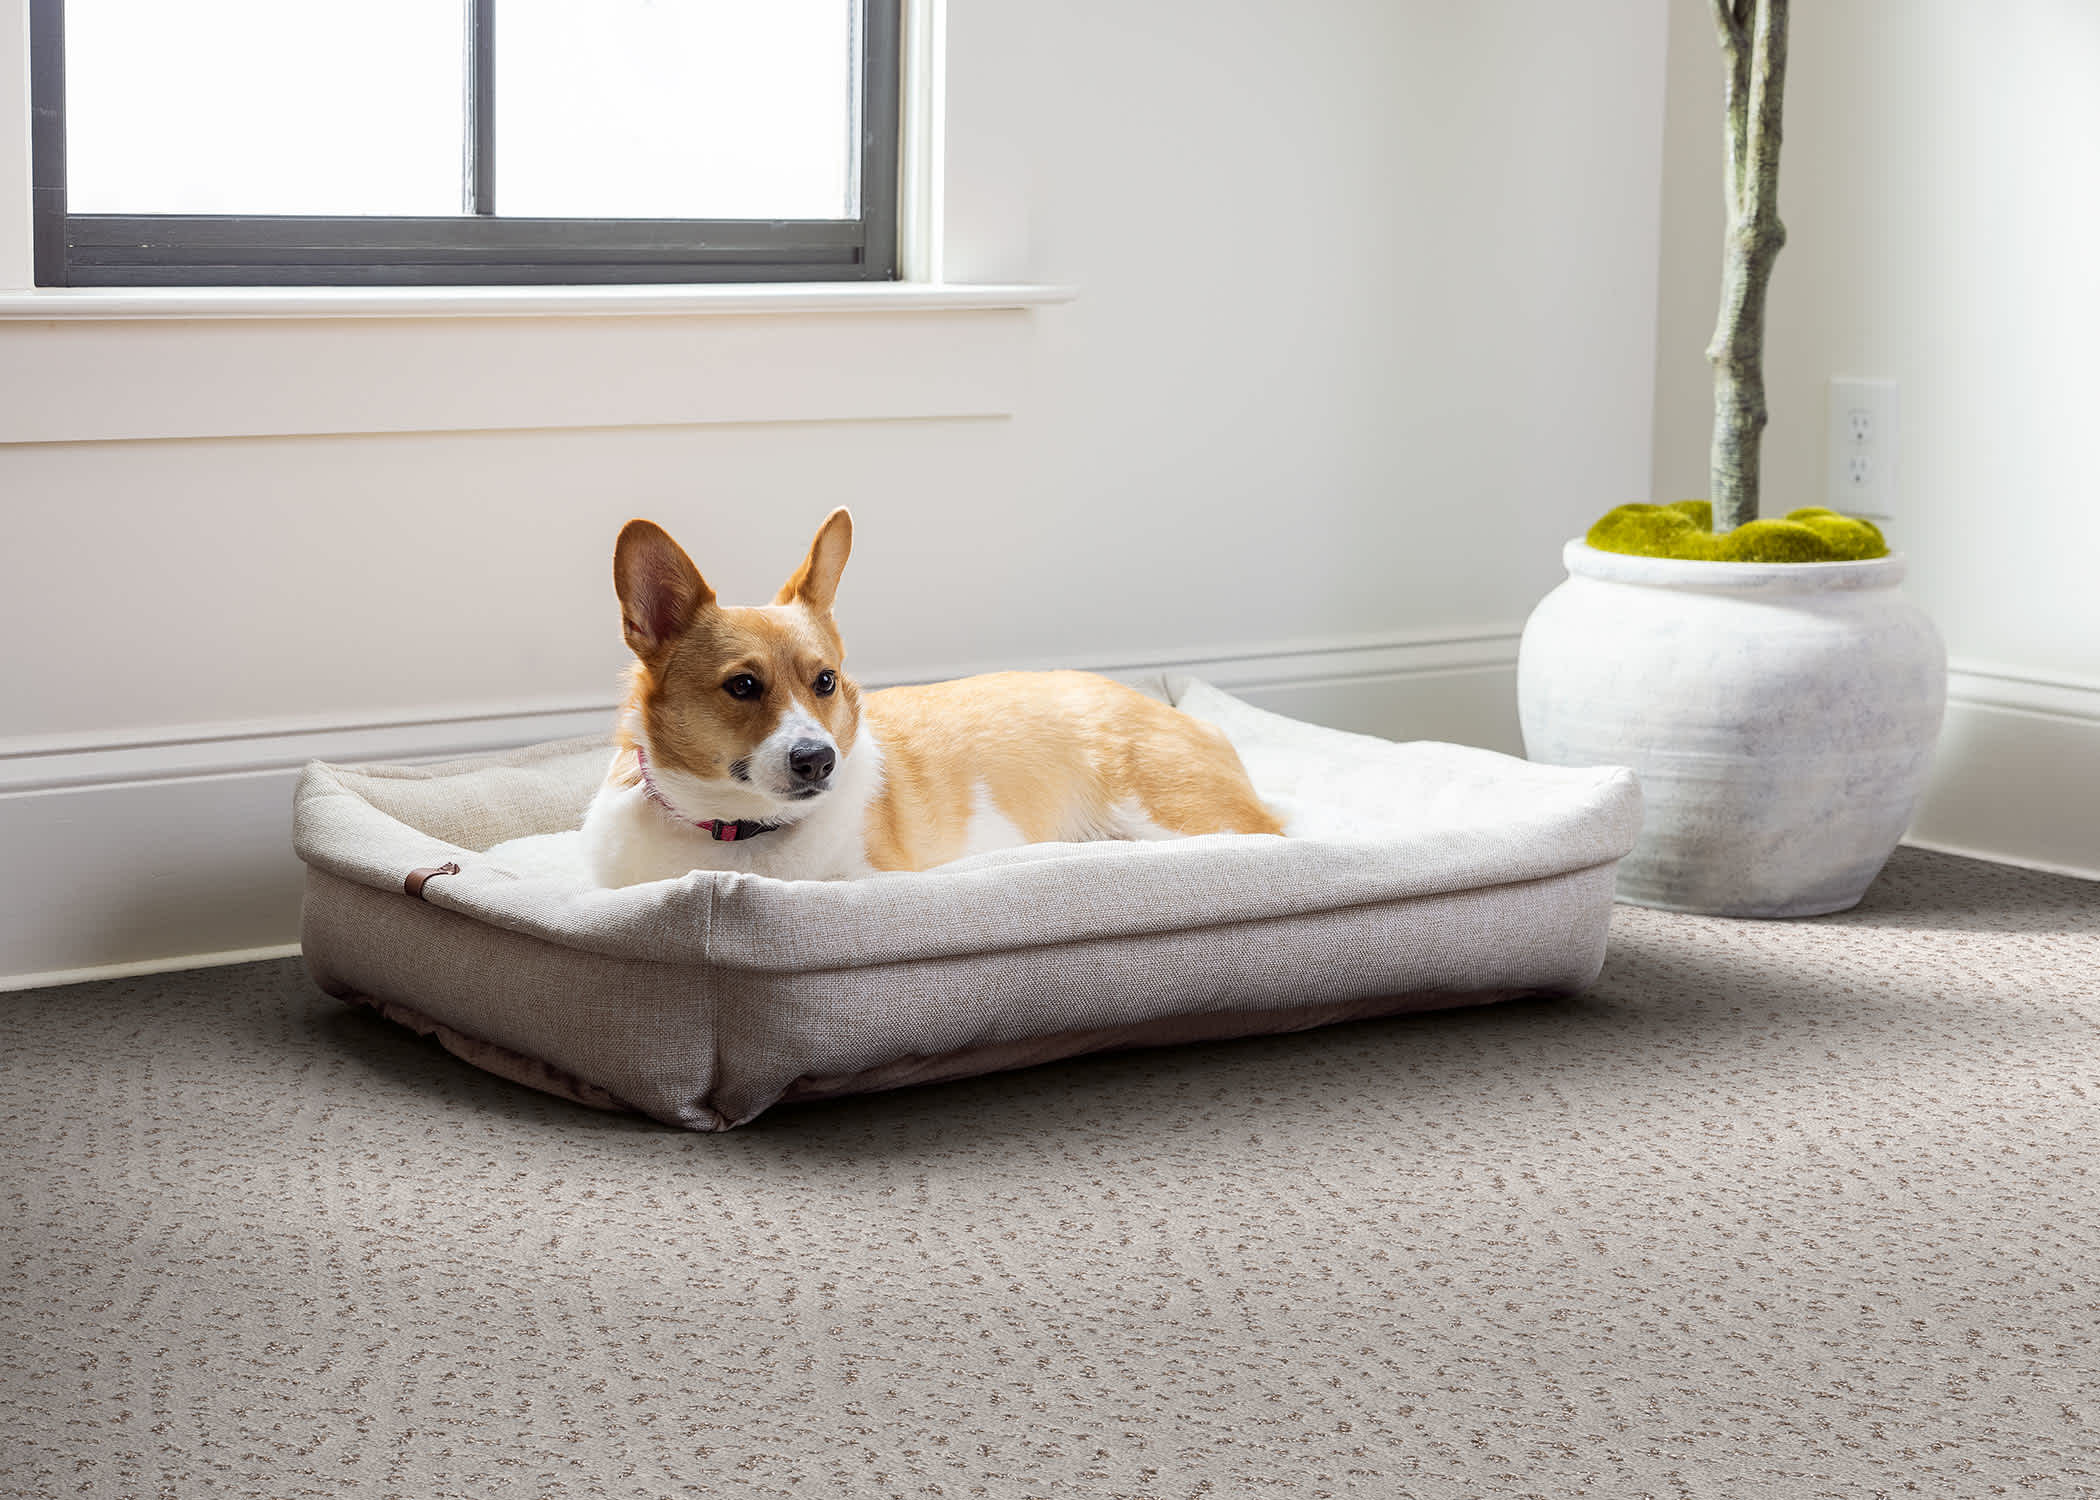 Image of a dog laying on a dog bed on carpet